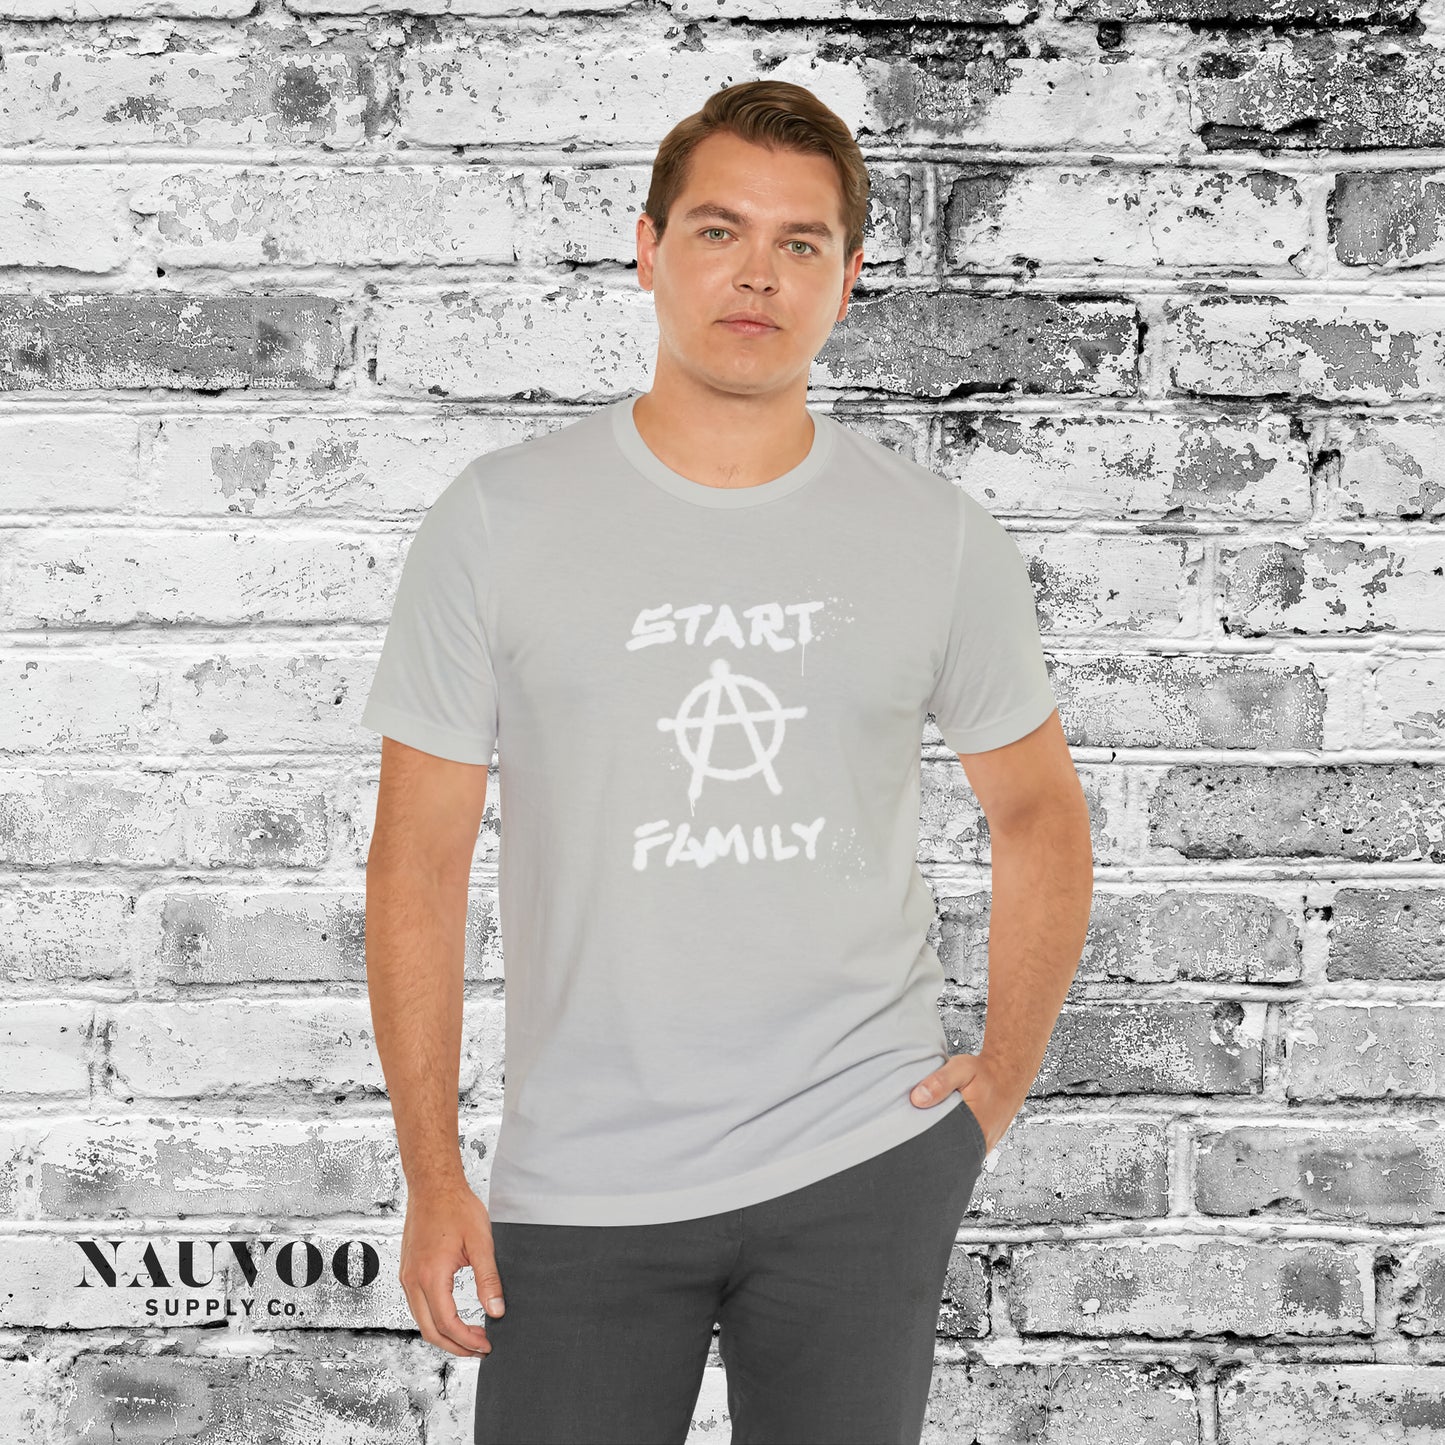 Start A Family - Funny Anarchy Shirt